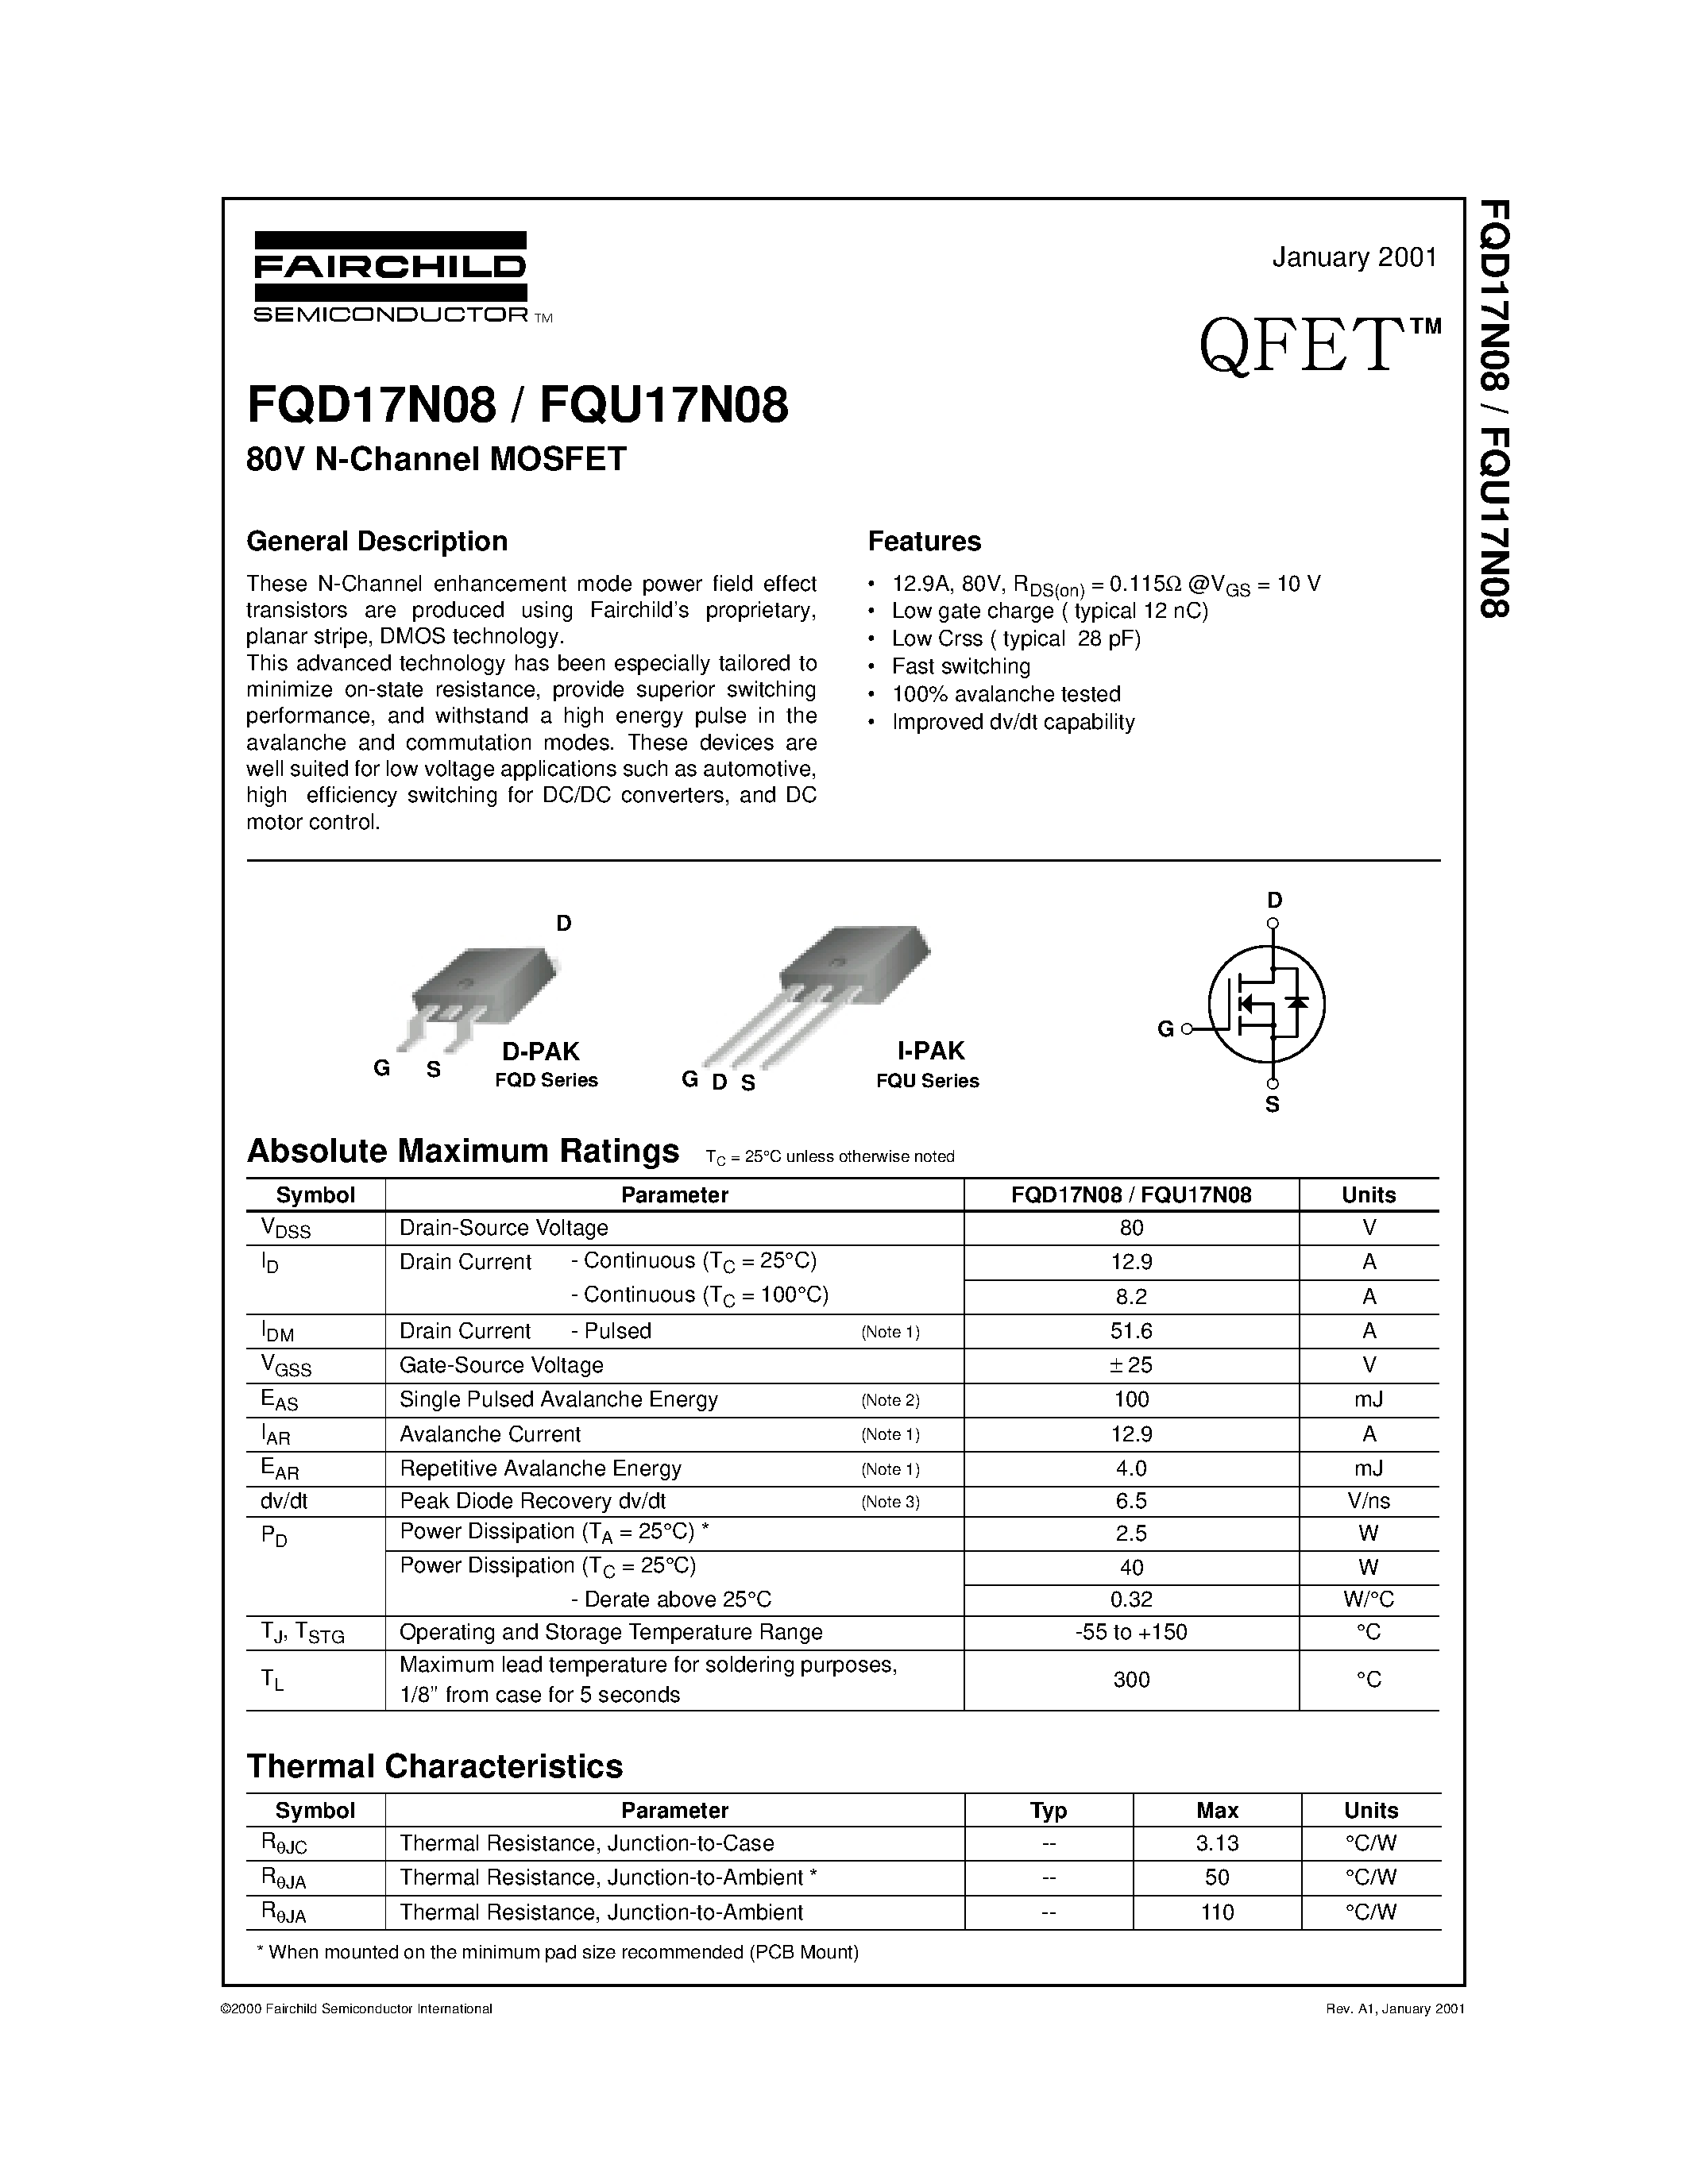 Datasheet FQD17N08 - 80V N-Channel MOSFET page 1